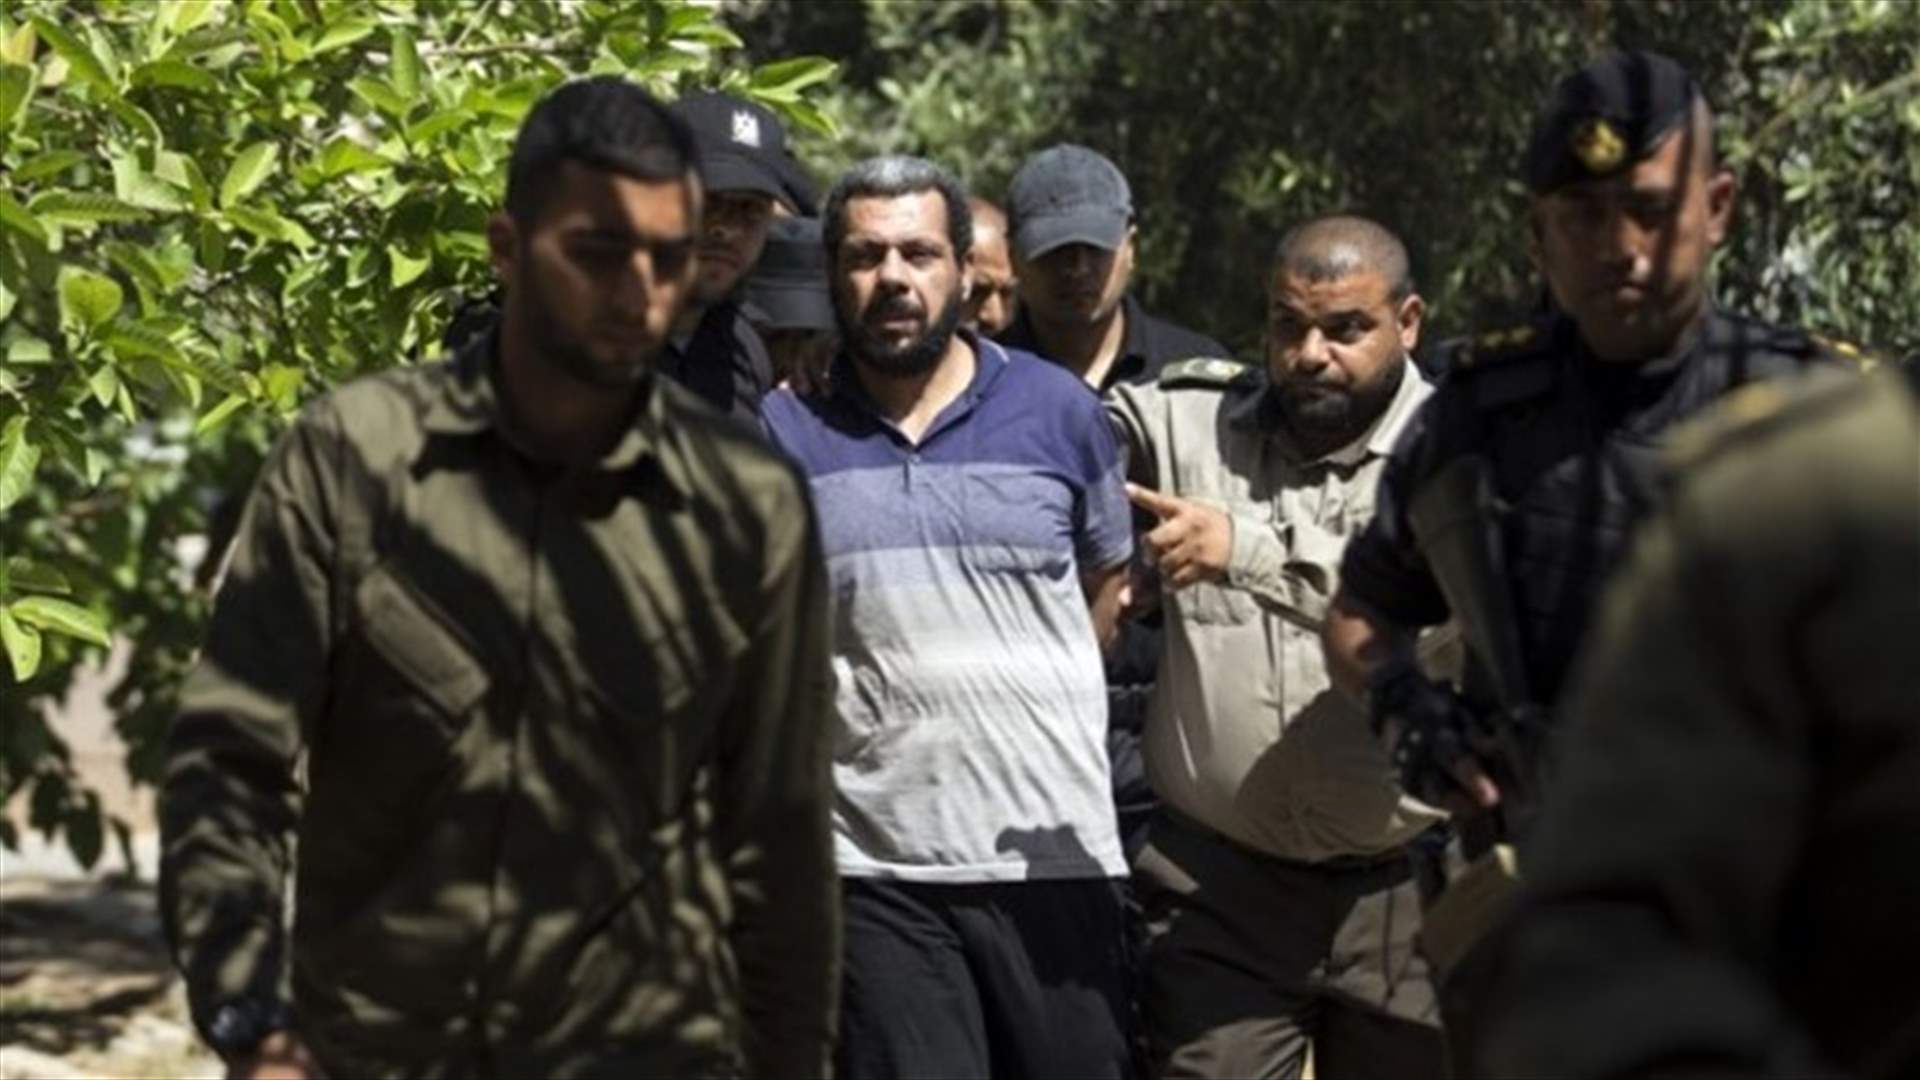 Hamas executes three Palestinians over killing says ordered by Israel